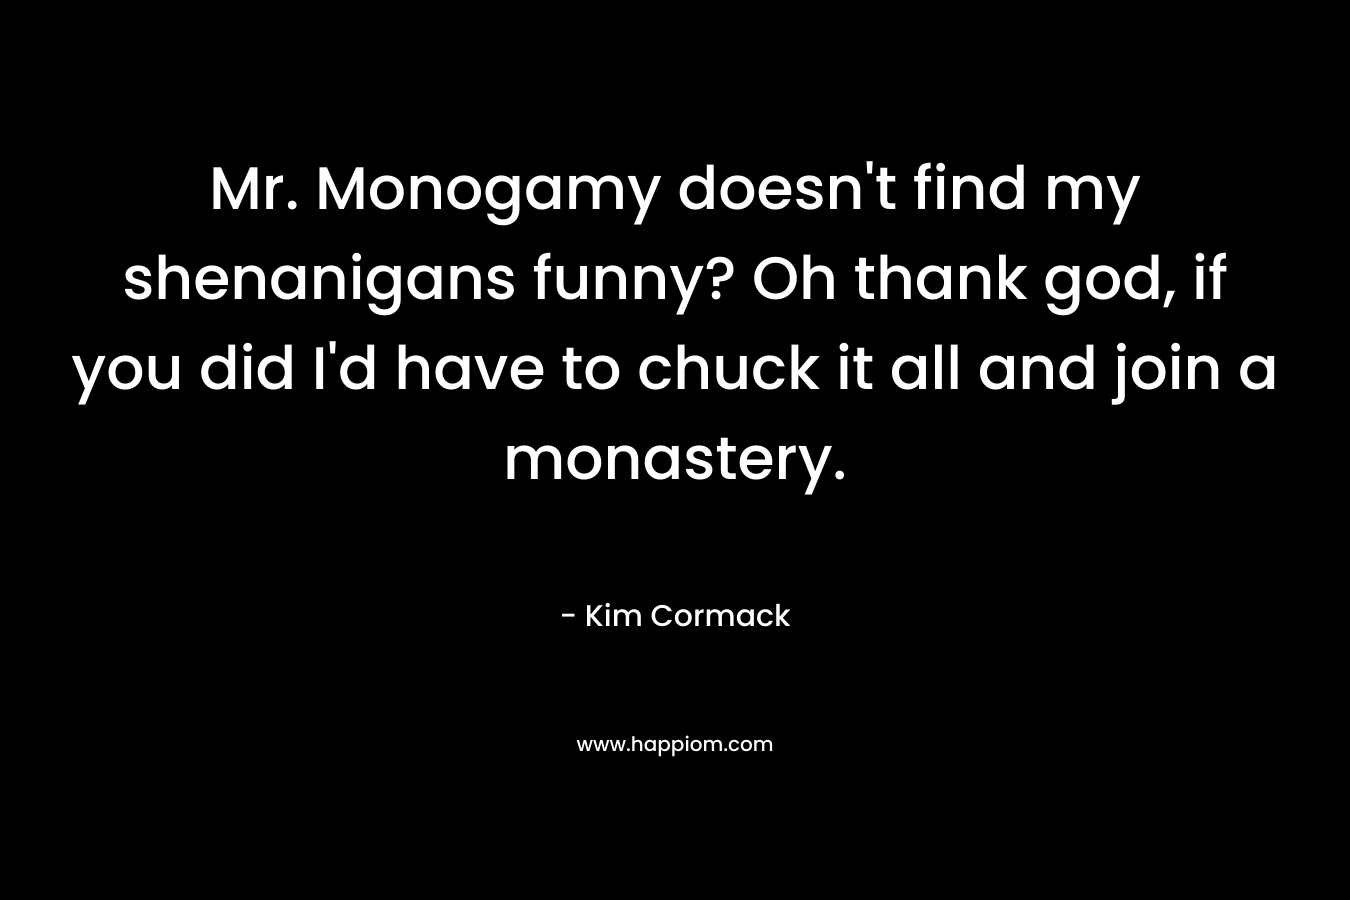 Mr. Monogamy doesn't find my shenanigans funny? Oh thank god, if you did I'd have to chuck it all and join a monastery.